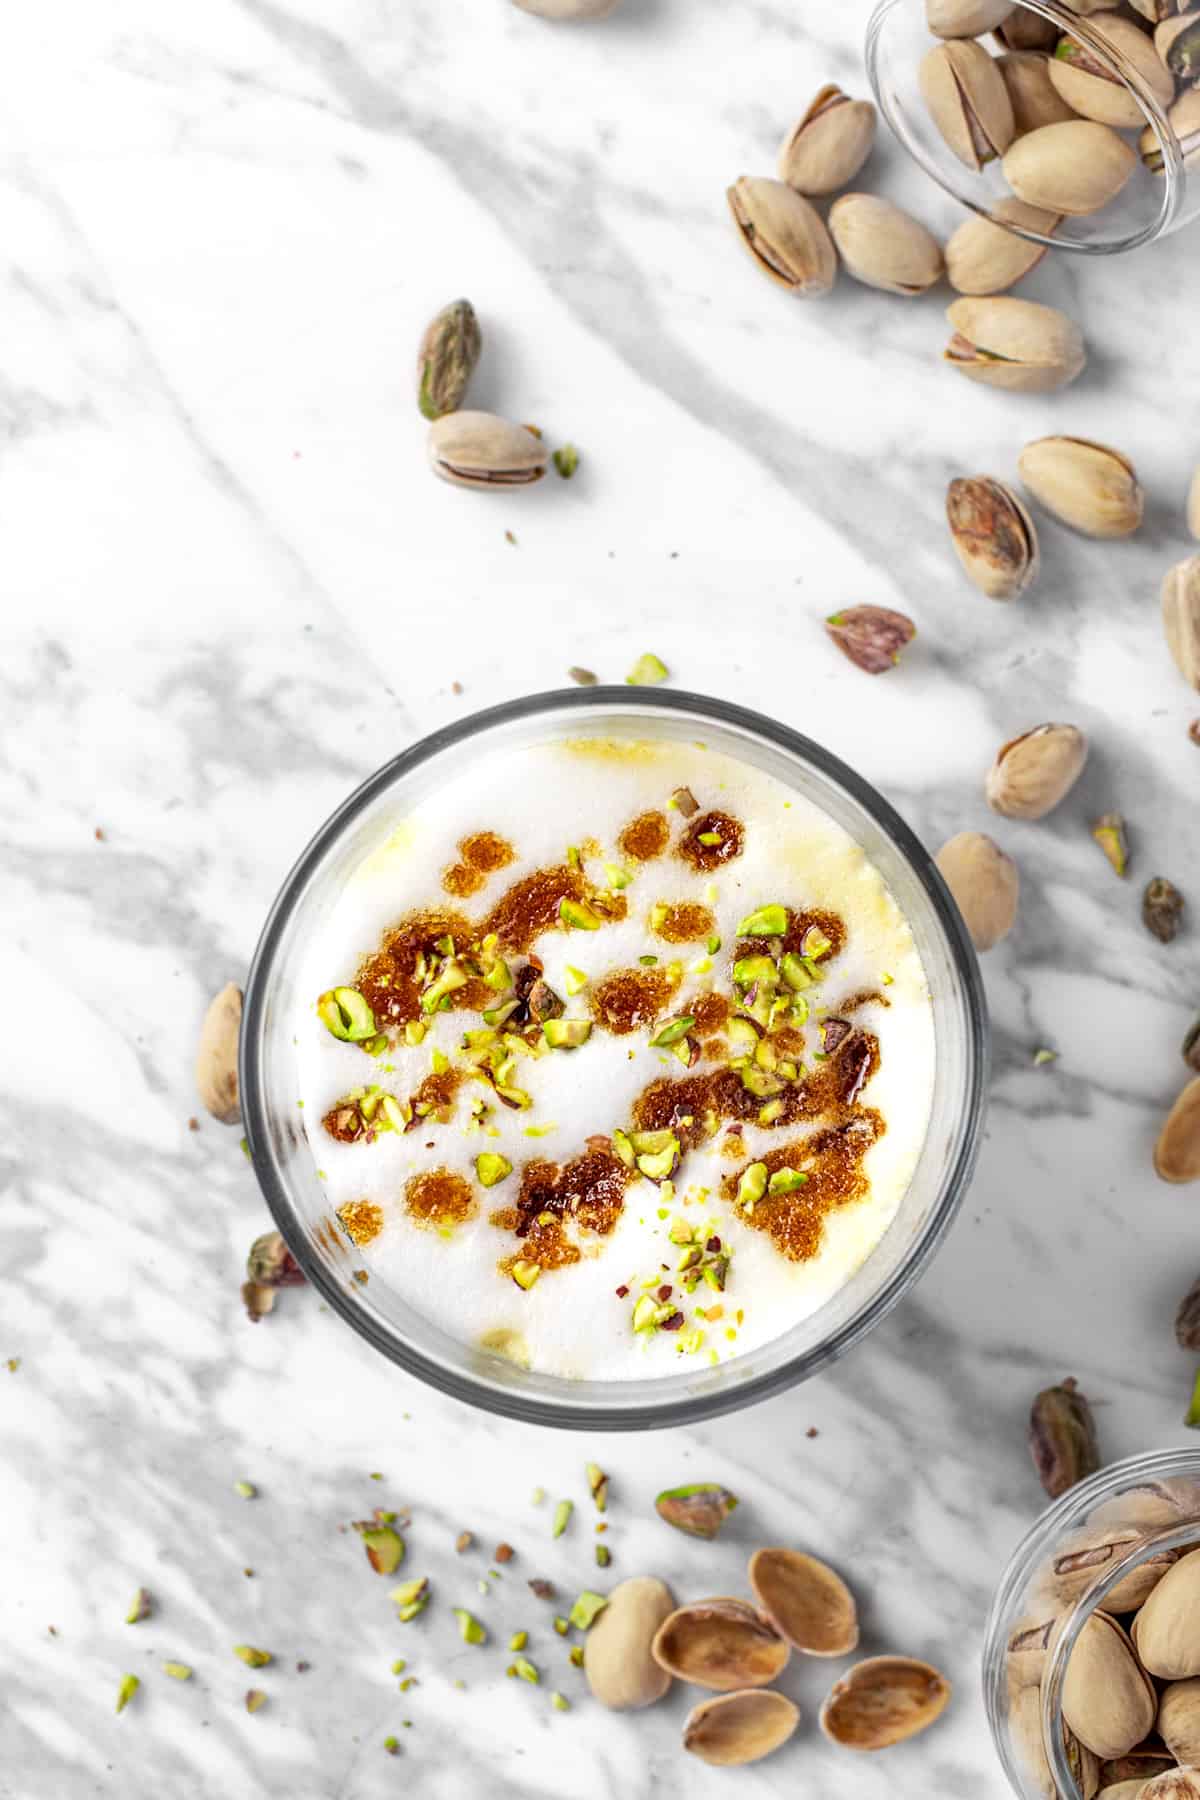 Overhead view of a starbucks pistachio latte topped with brown butter brown sugar topping and crushed pistachios.